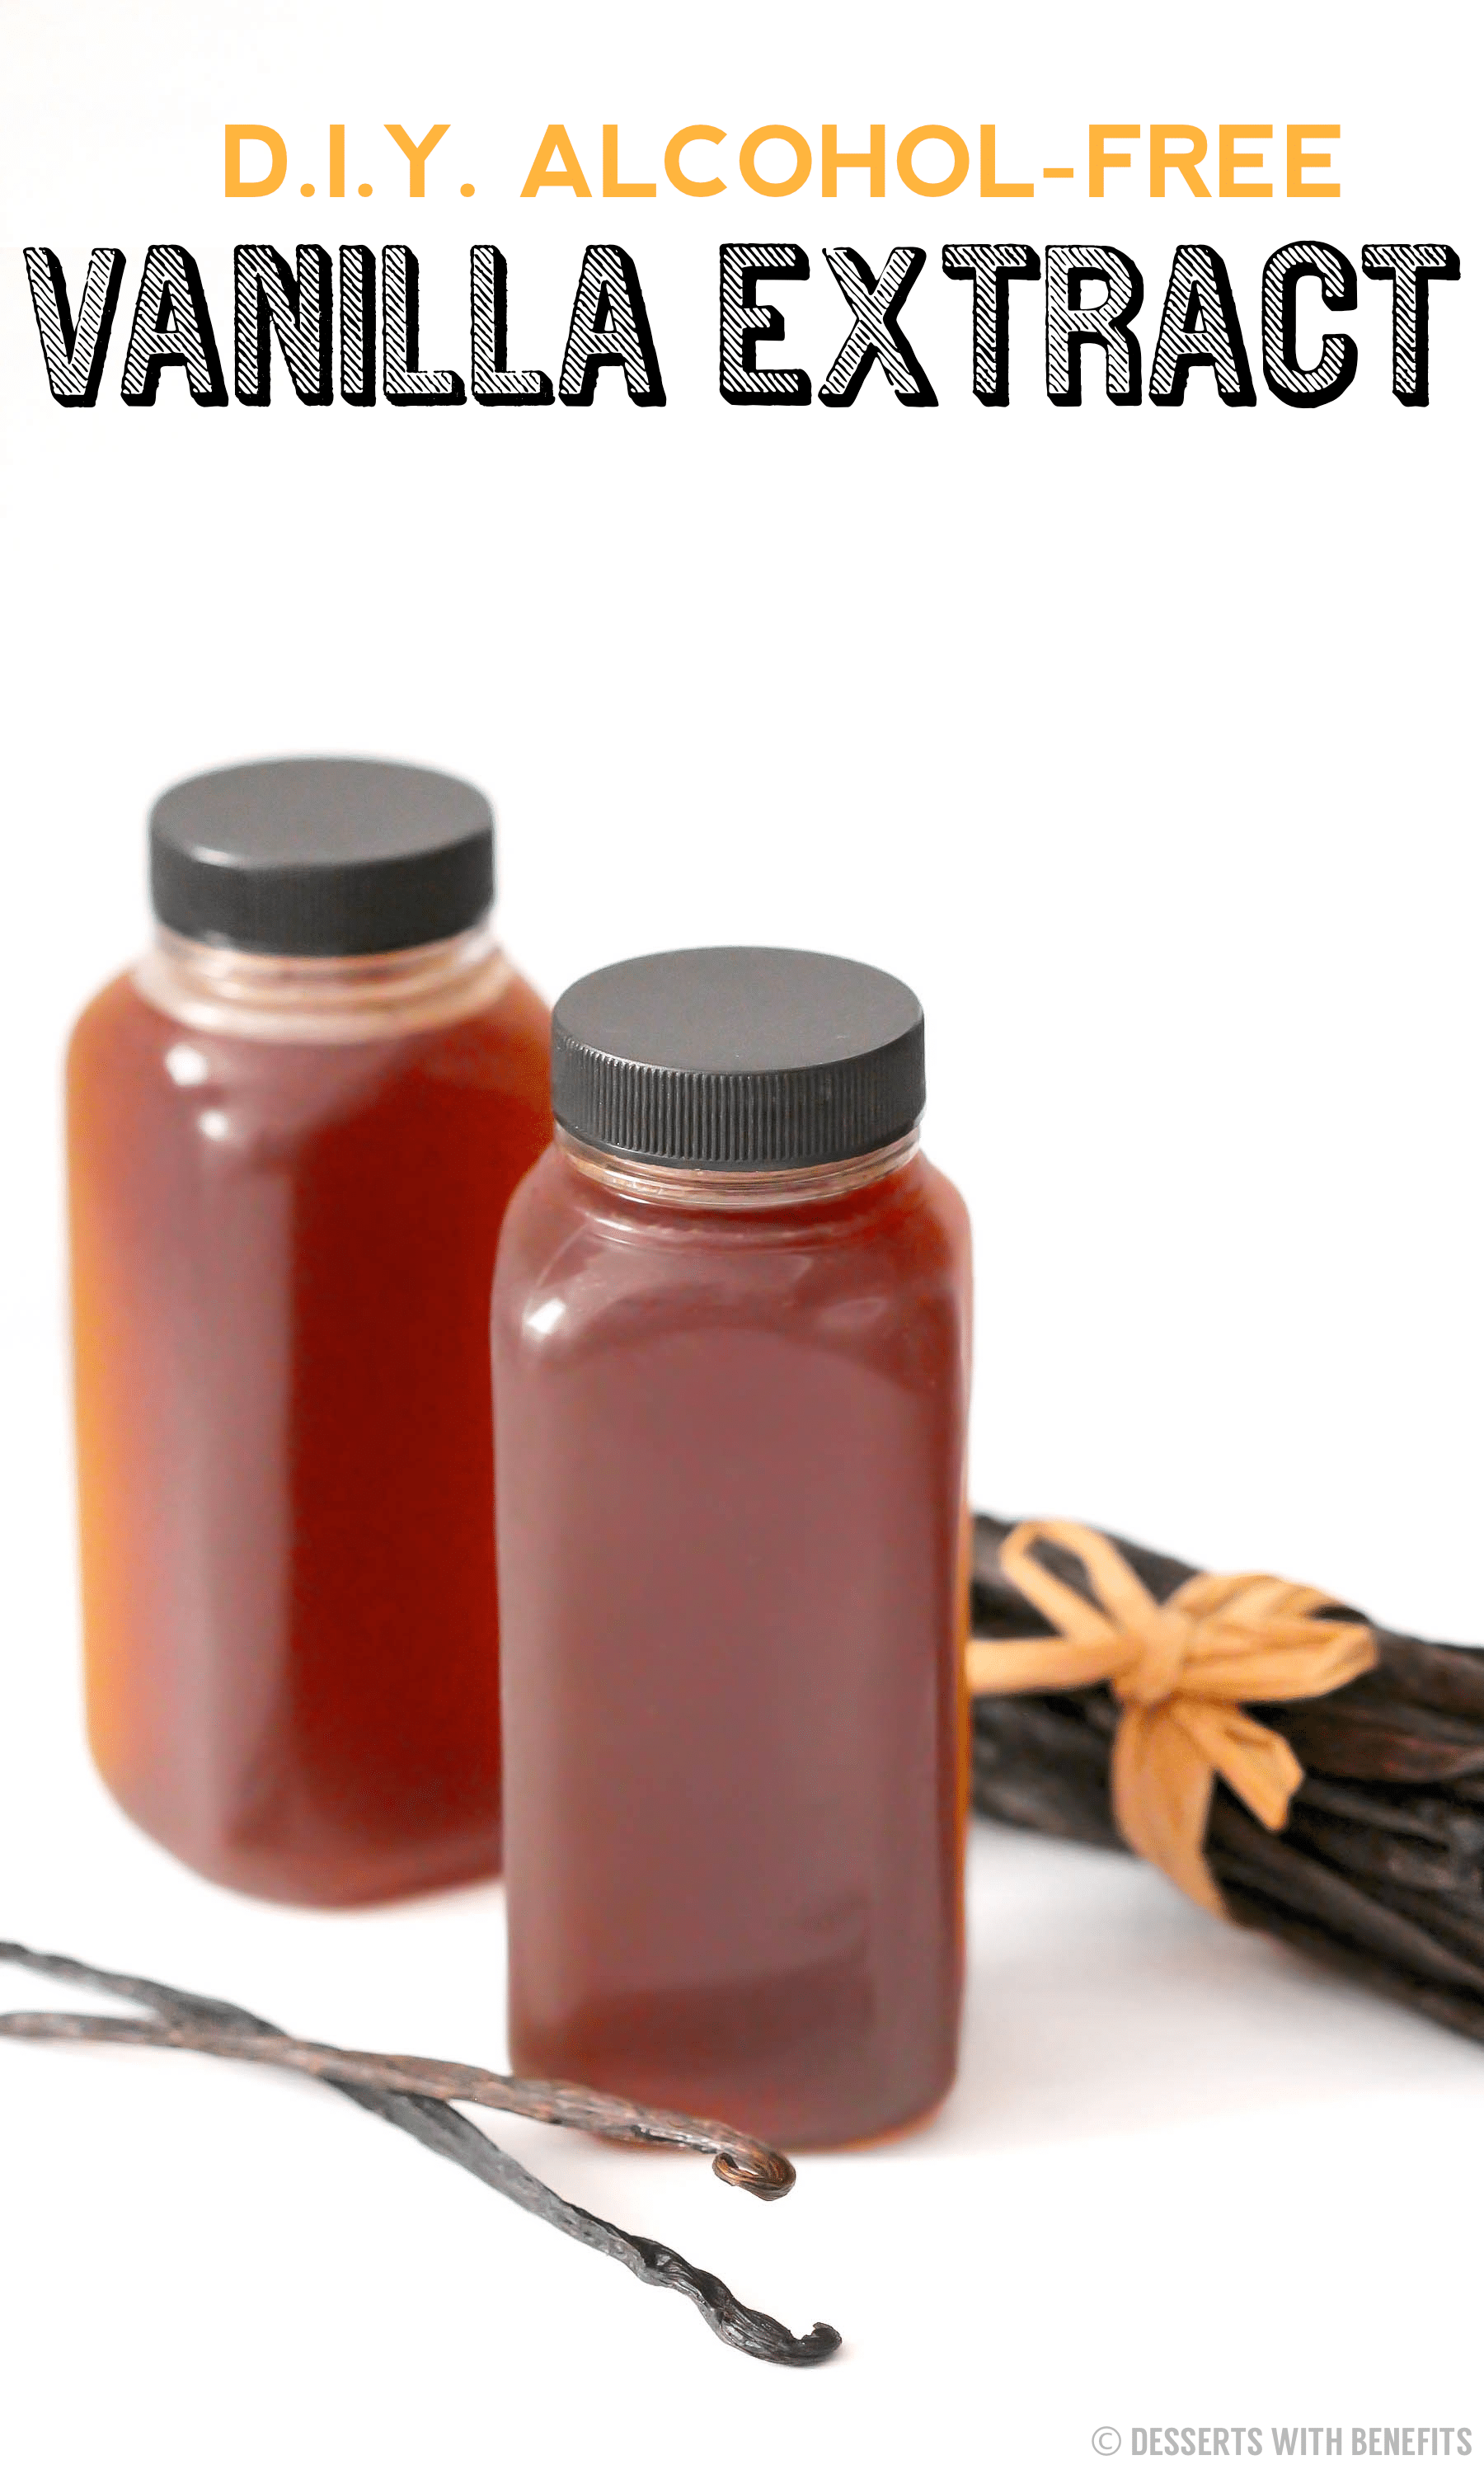 How to Make Vanilla Extract Without Alcohol?